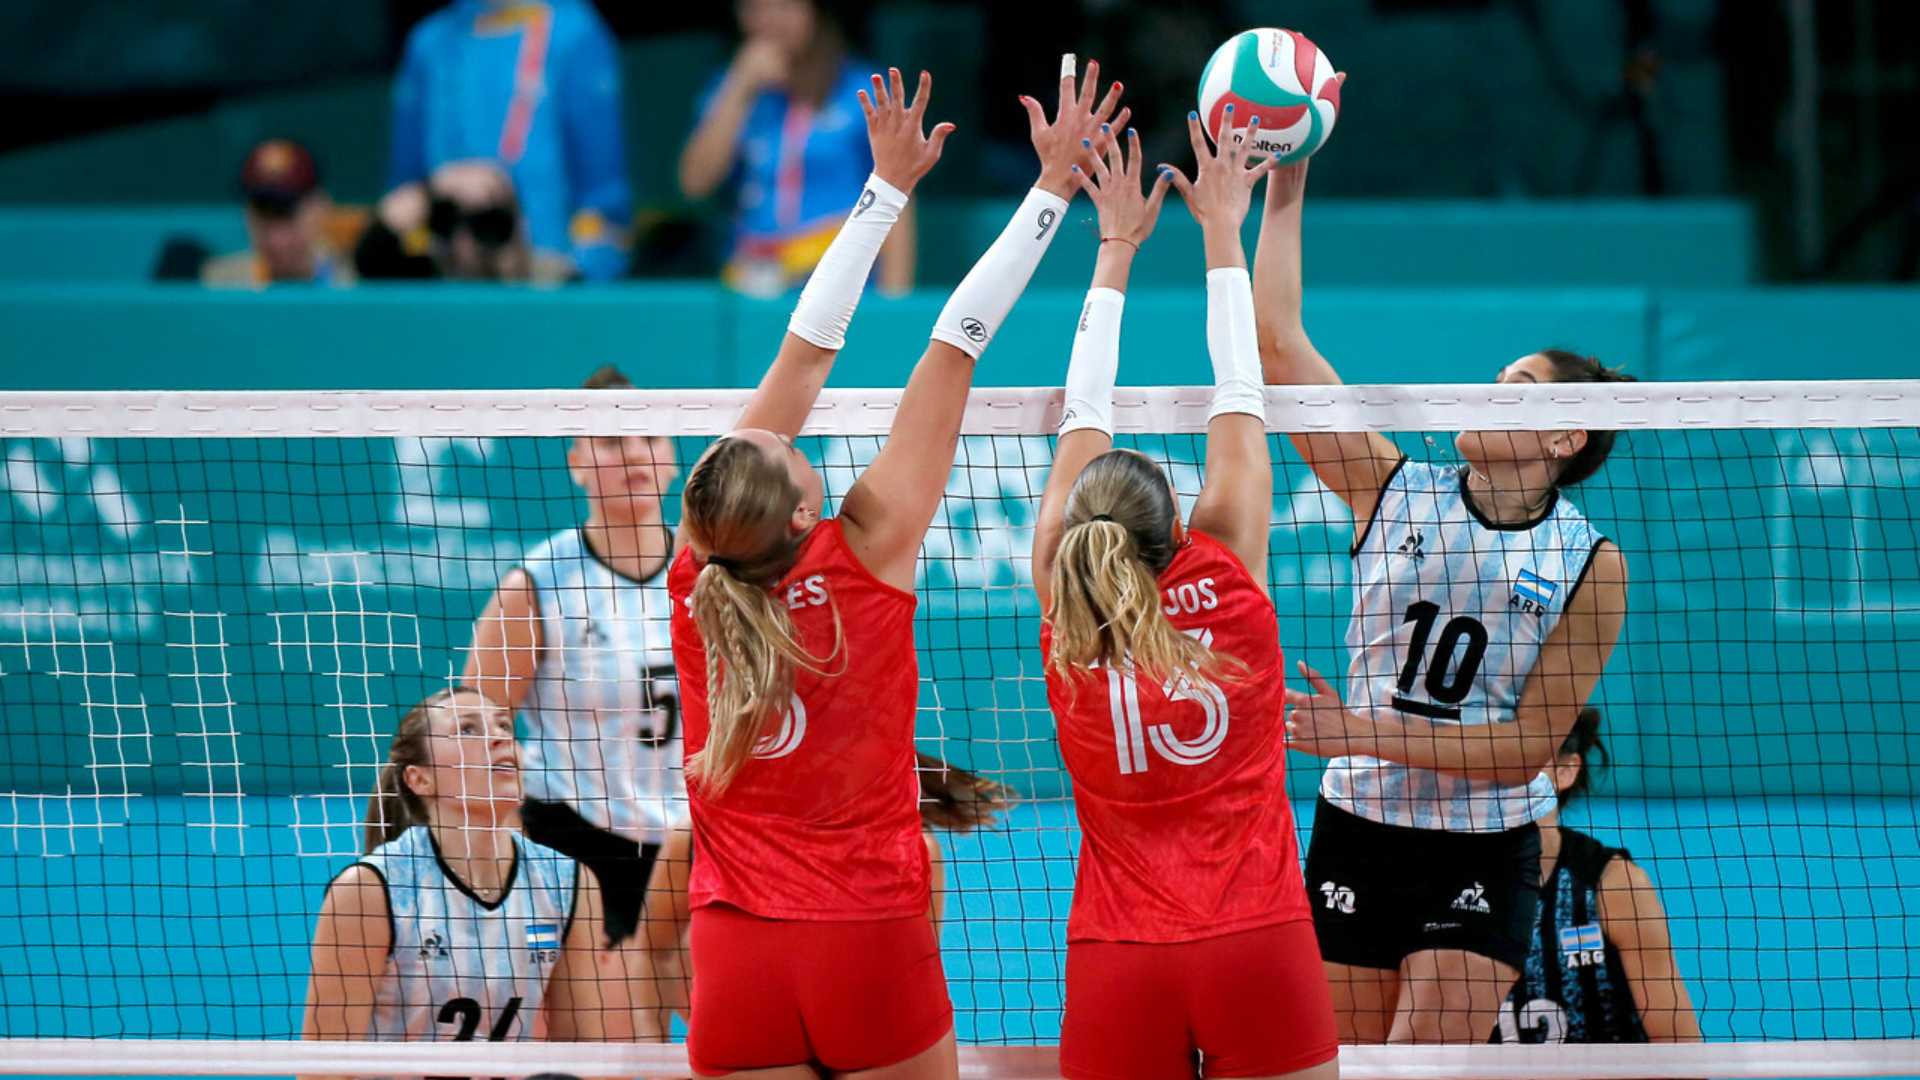 Argentina defeats Chile, advances to semifinals in female’s volleyball